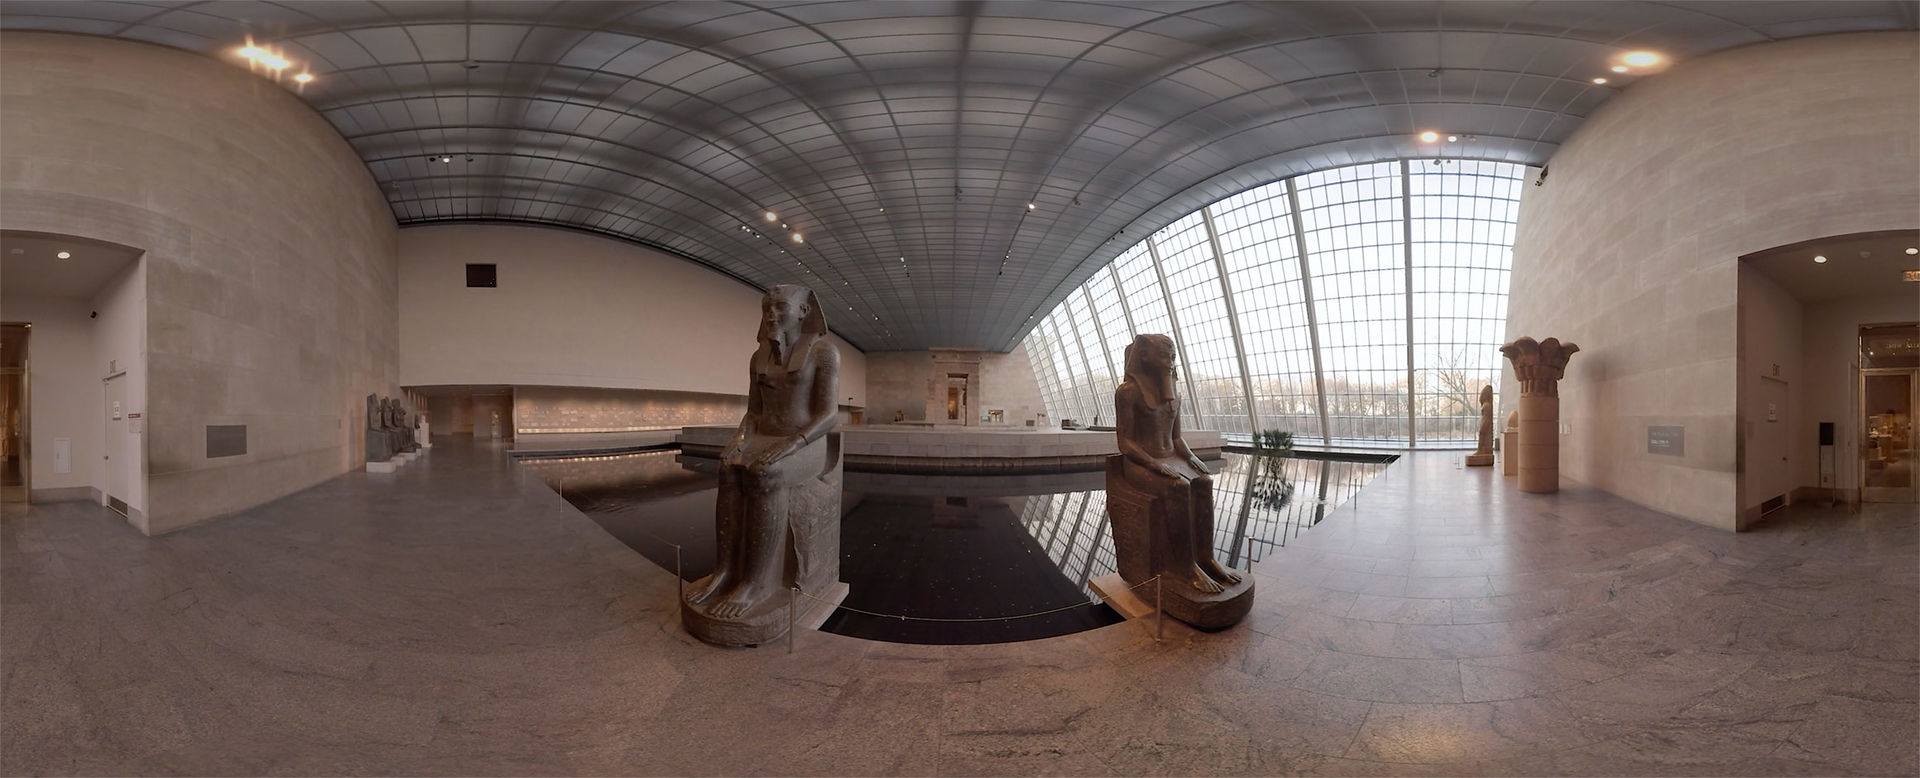 A 3D panorama view of the Temple of Dendur in the Sackler Wing at The Met